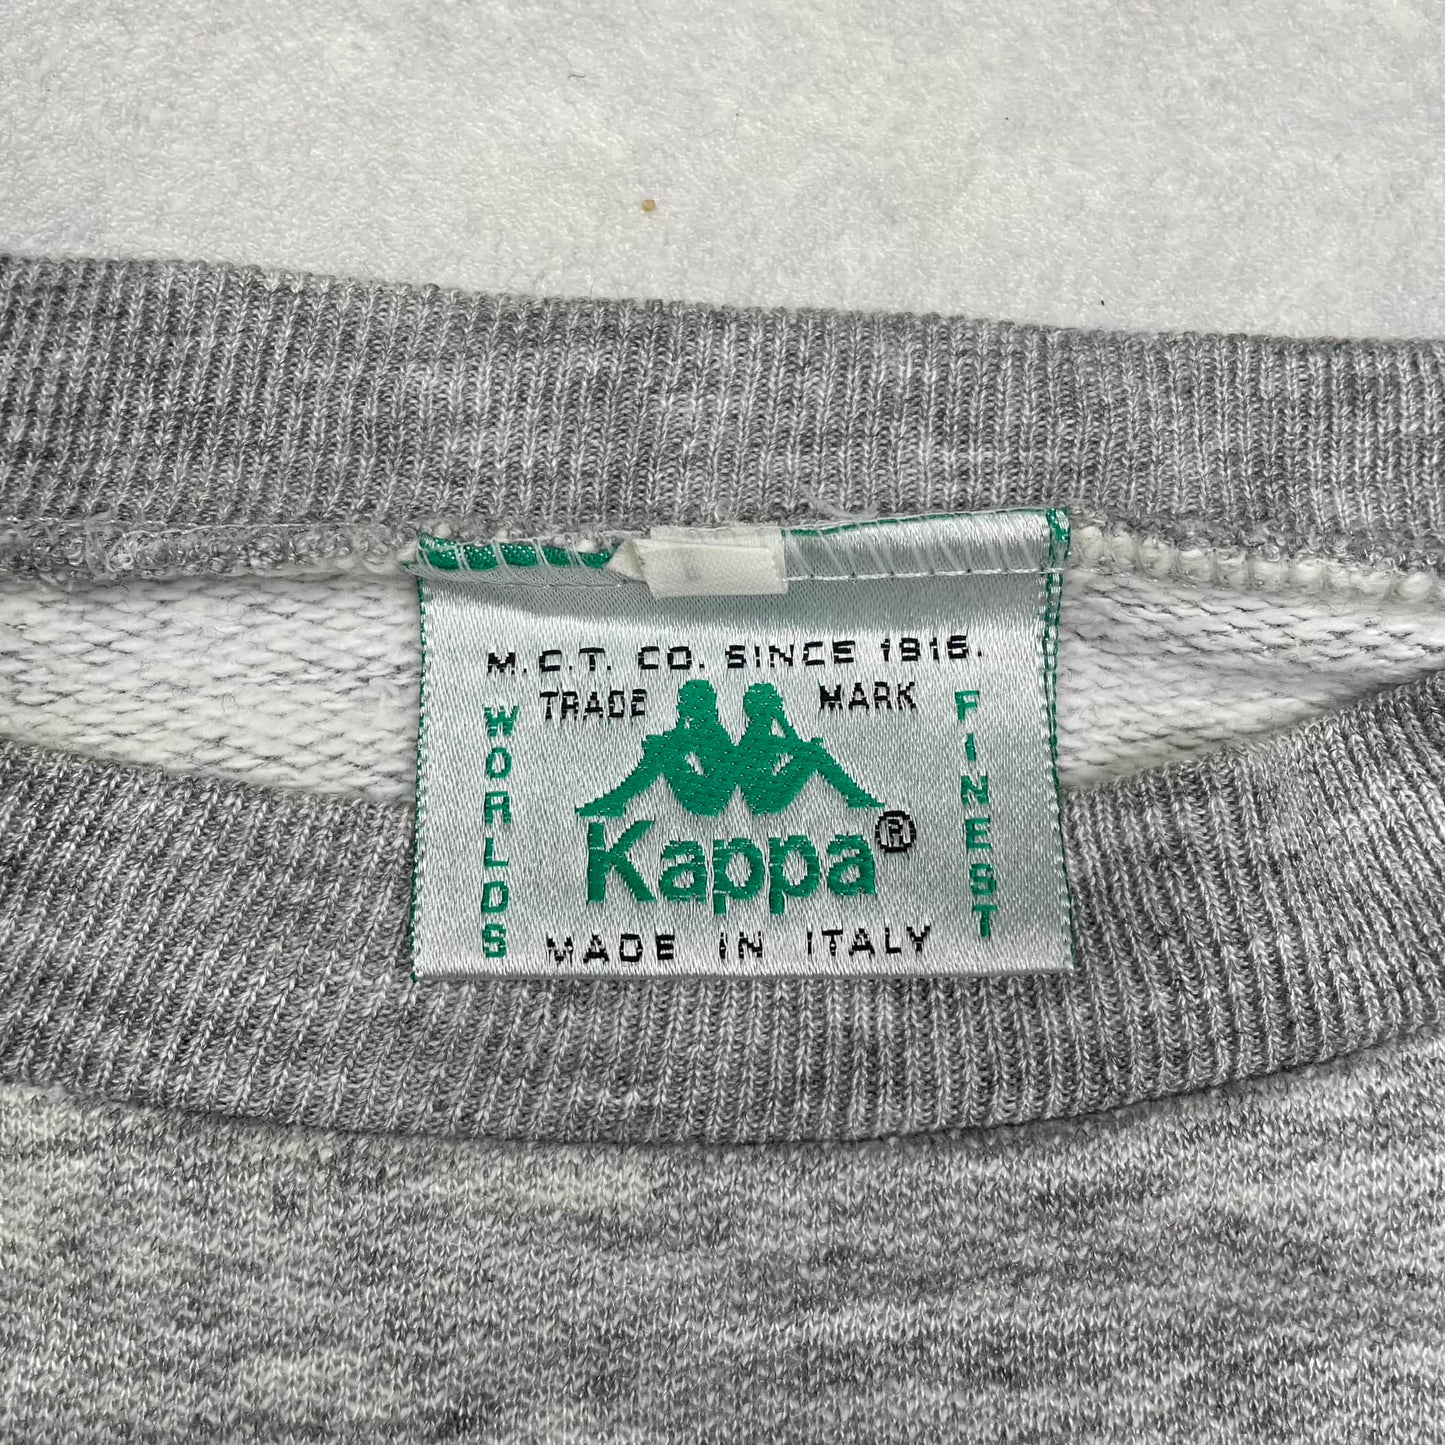 Vintage Sweater Kappa Made in Italy